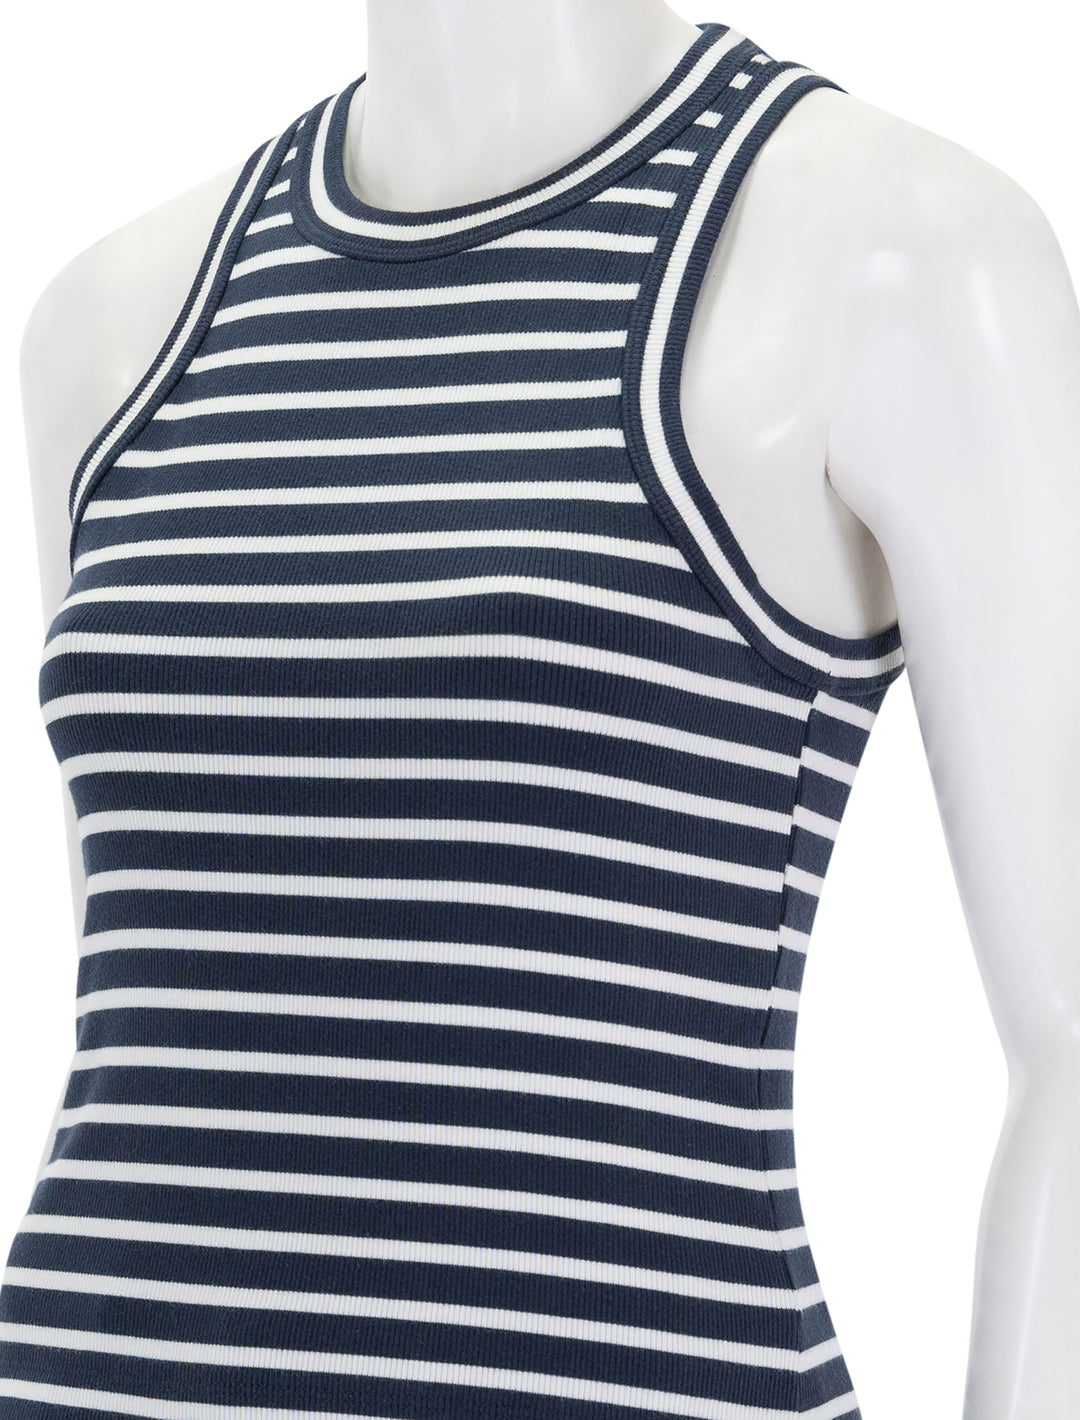 Close-up view of Veronica Beard's cropped jordyn tank in marine and white stripe.